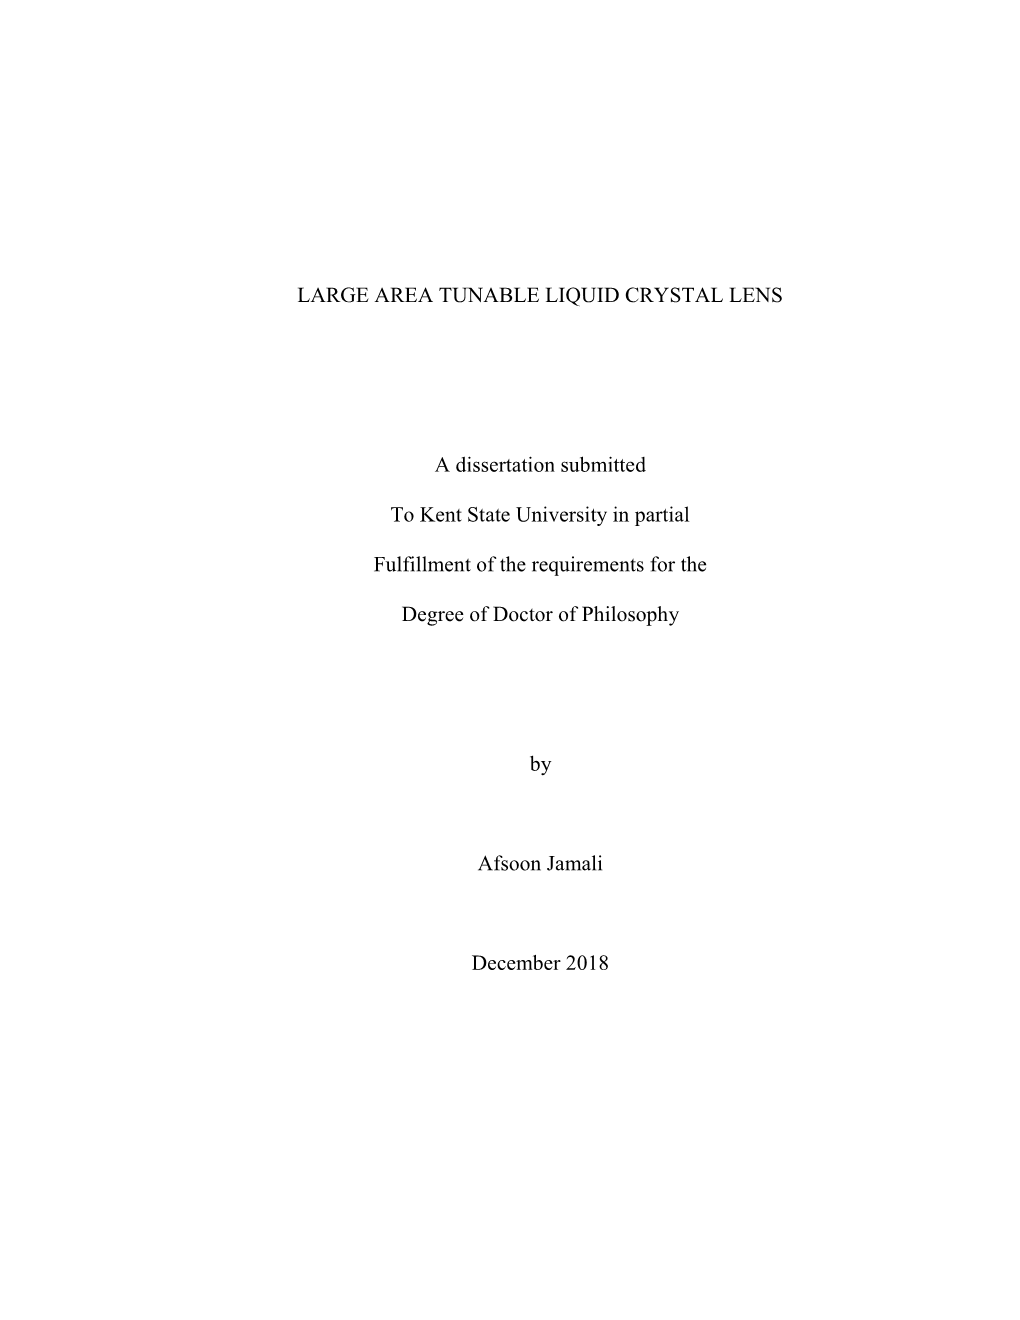 LARGE AREA TUNABLE LIQUID CRYSTAL LENS a Dissertation Submitted to Kent State University in Partial Fulfillment of the Requireme